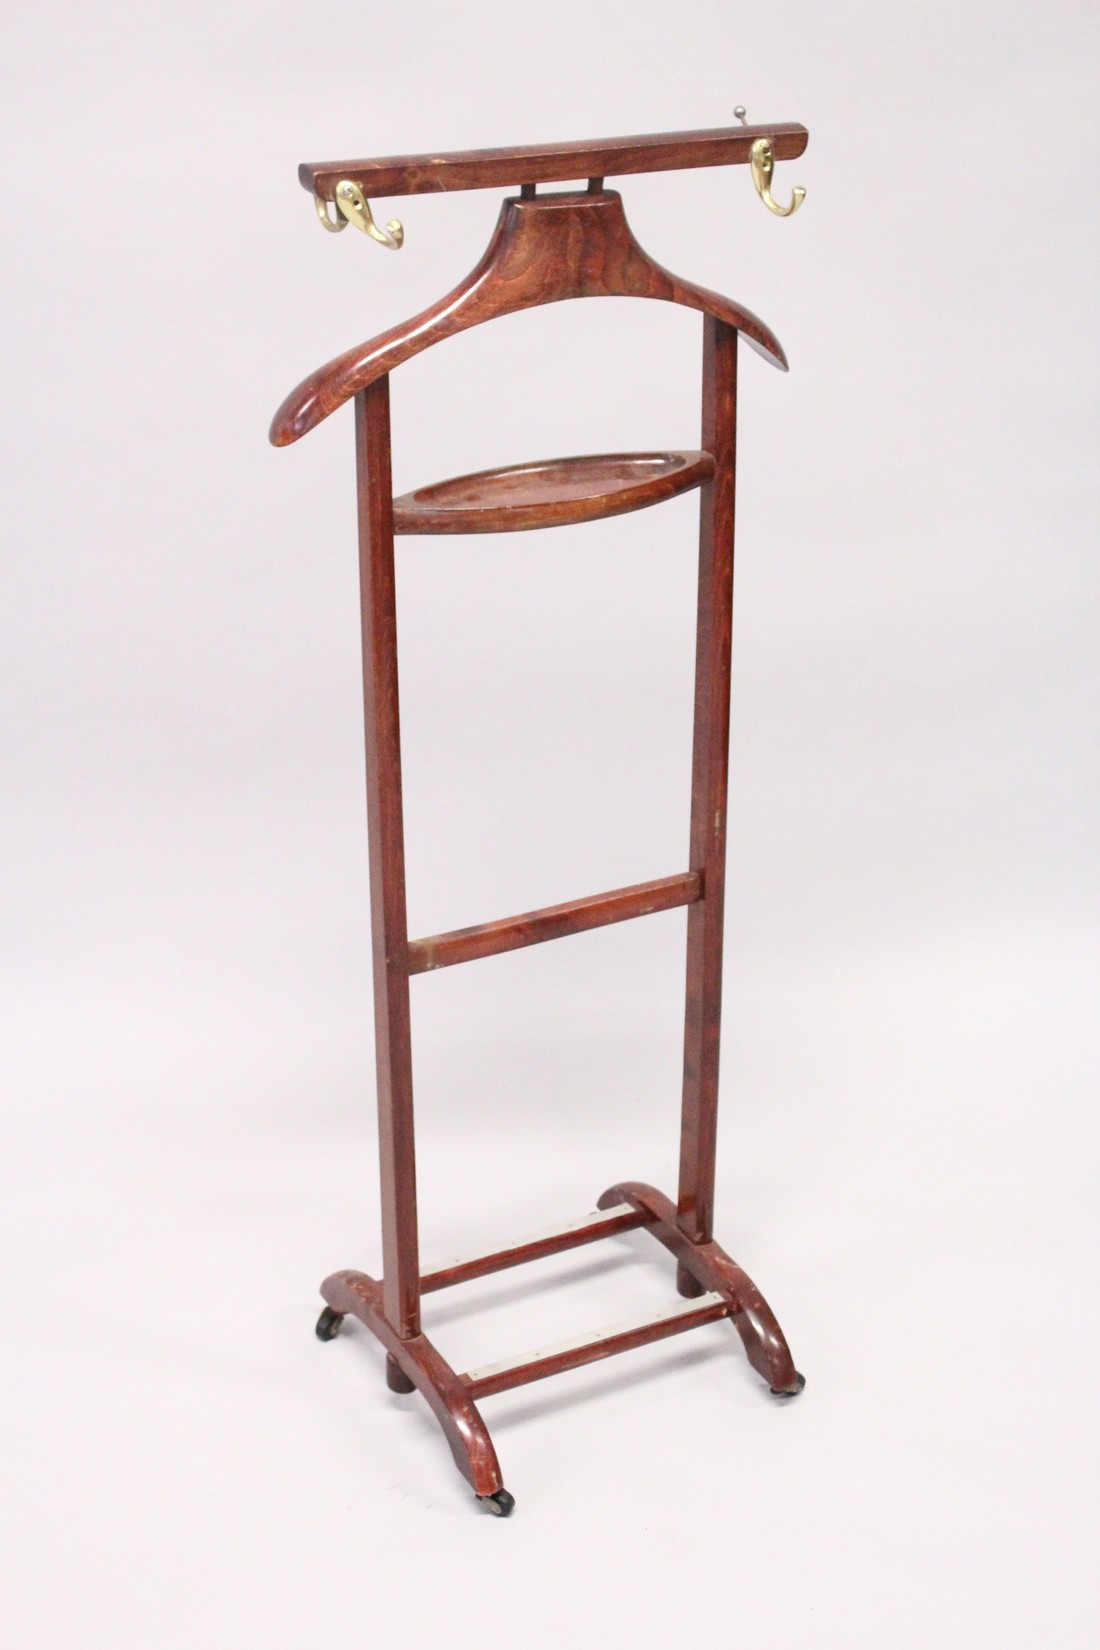 A HARDWOOD CLOTHES VALET 3ft 7.5ins high. - Image 3 of 3